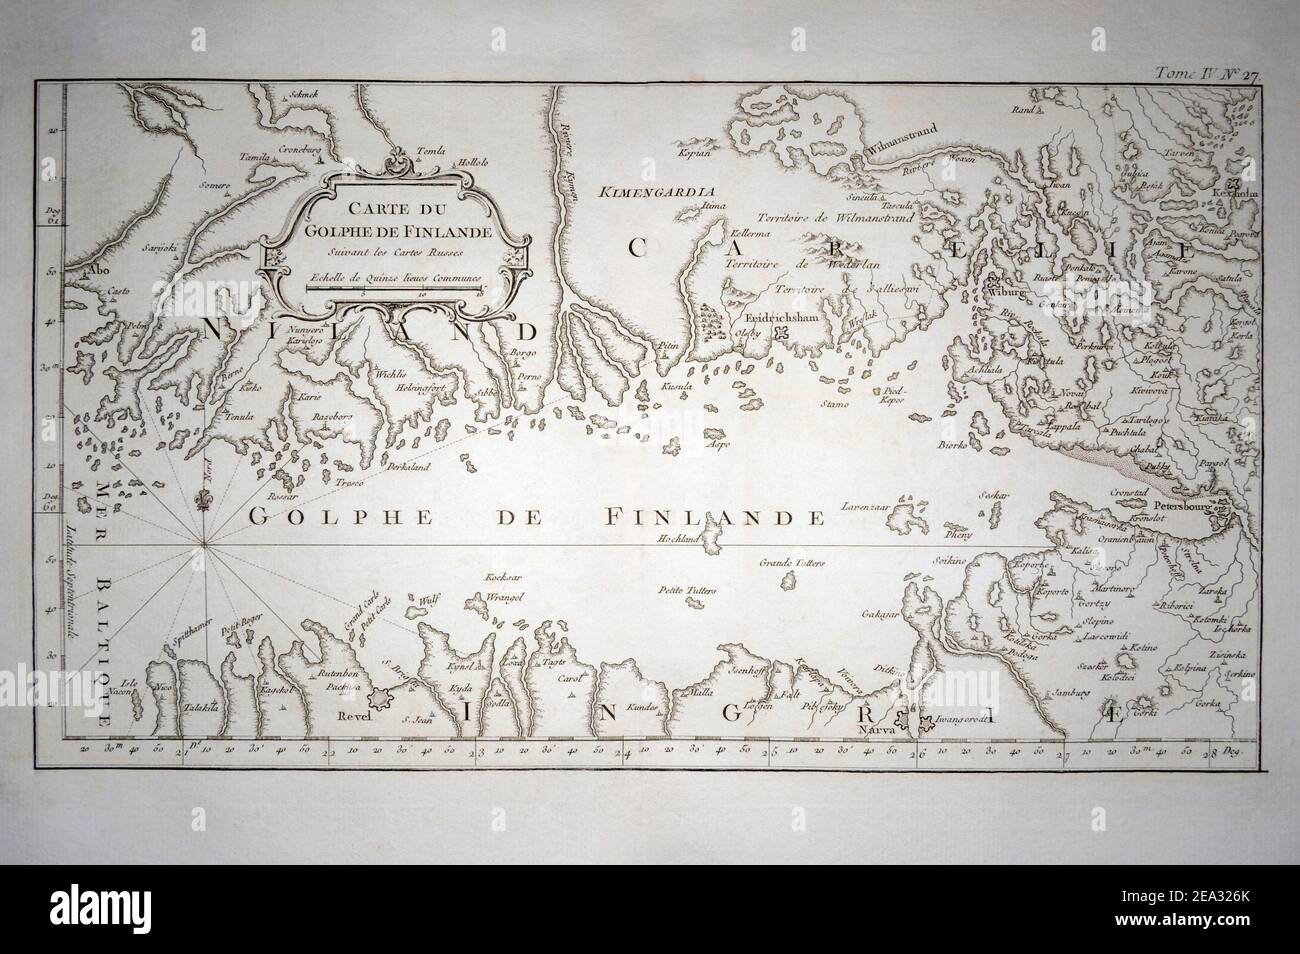 Carte du Golphe de Finlande by Jacques-Nicolas Bellin, an original copper plate engraving from the year 1760. This Bellin (1703-1772) map gives to you Stock Photo